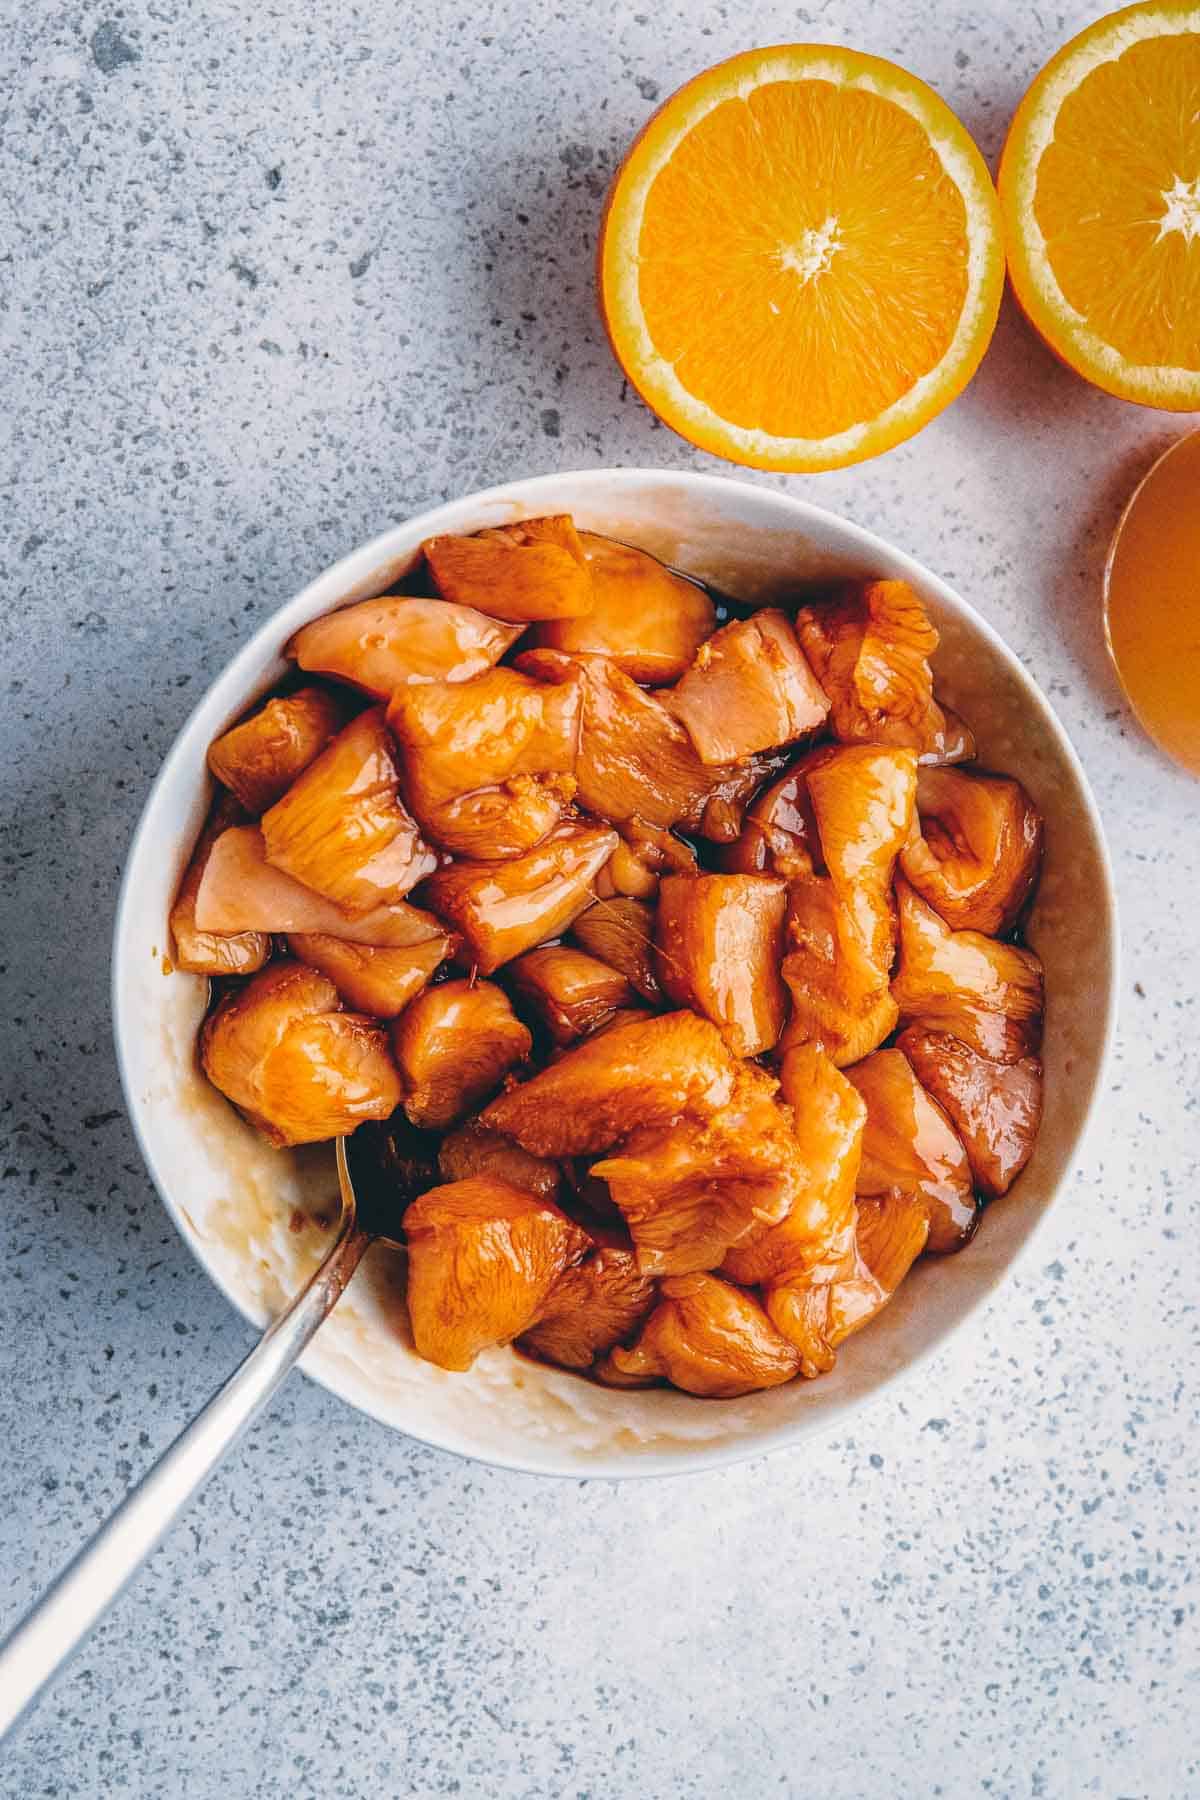 A bowl of chicken with orange slices and a spoon.